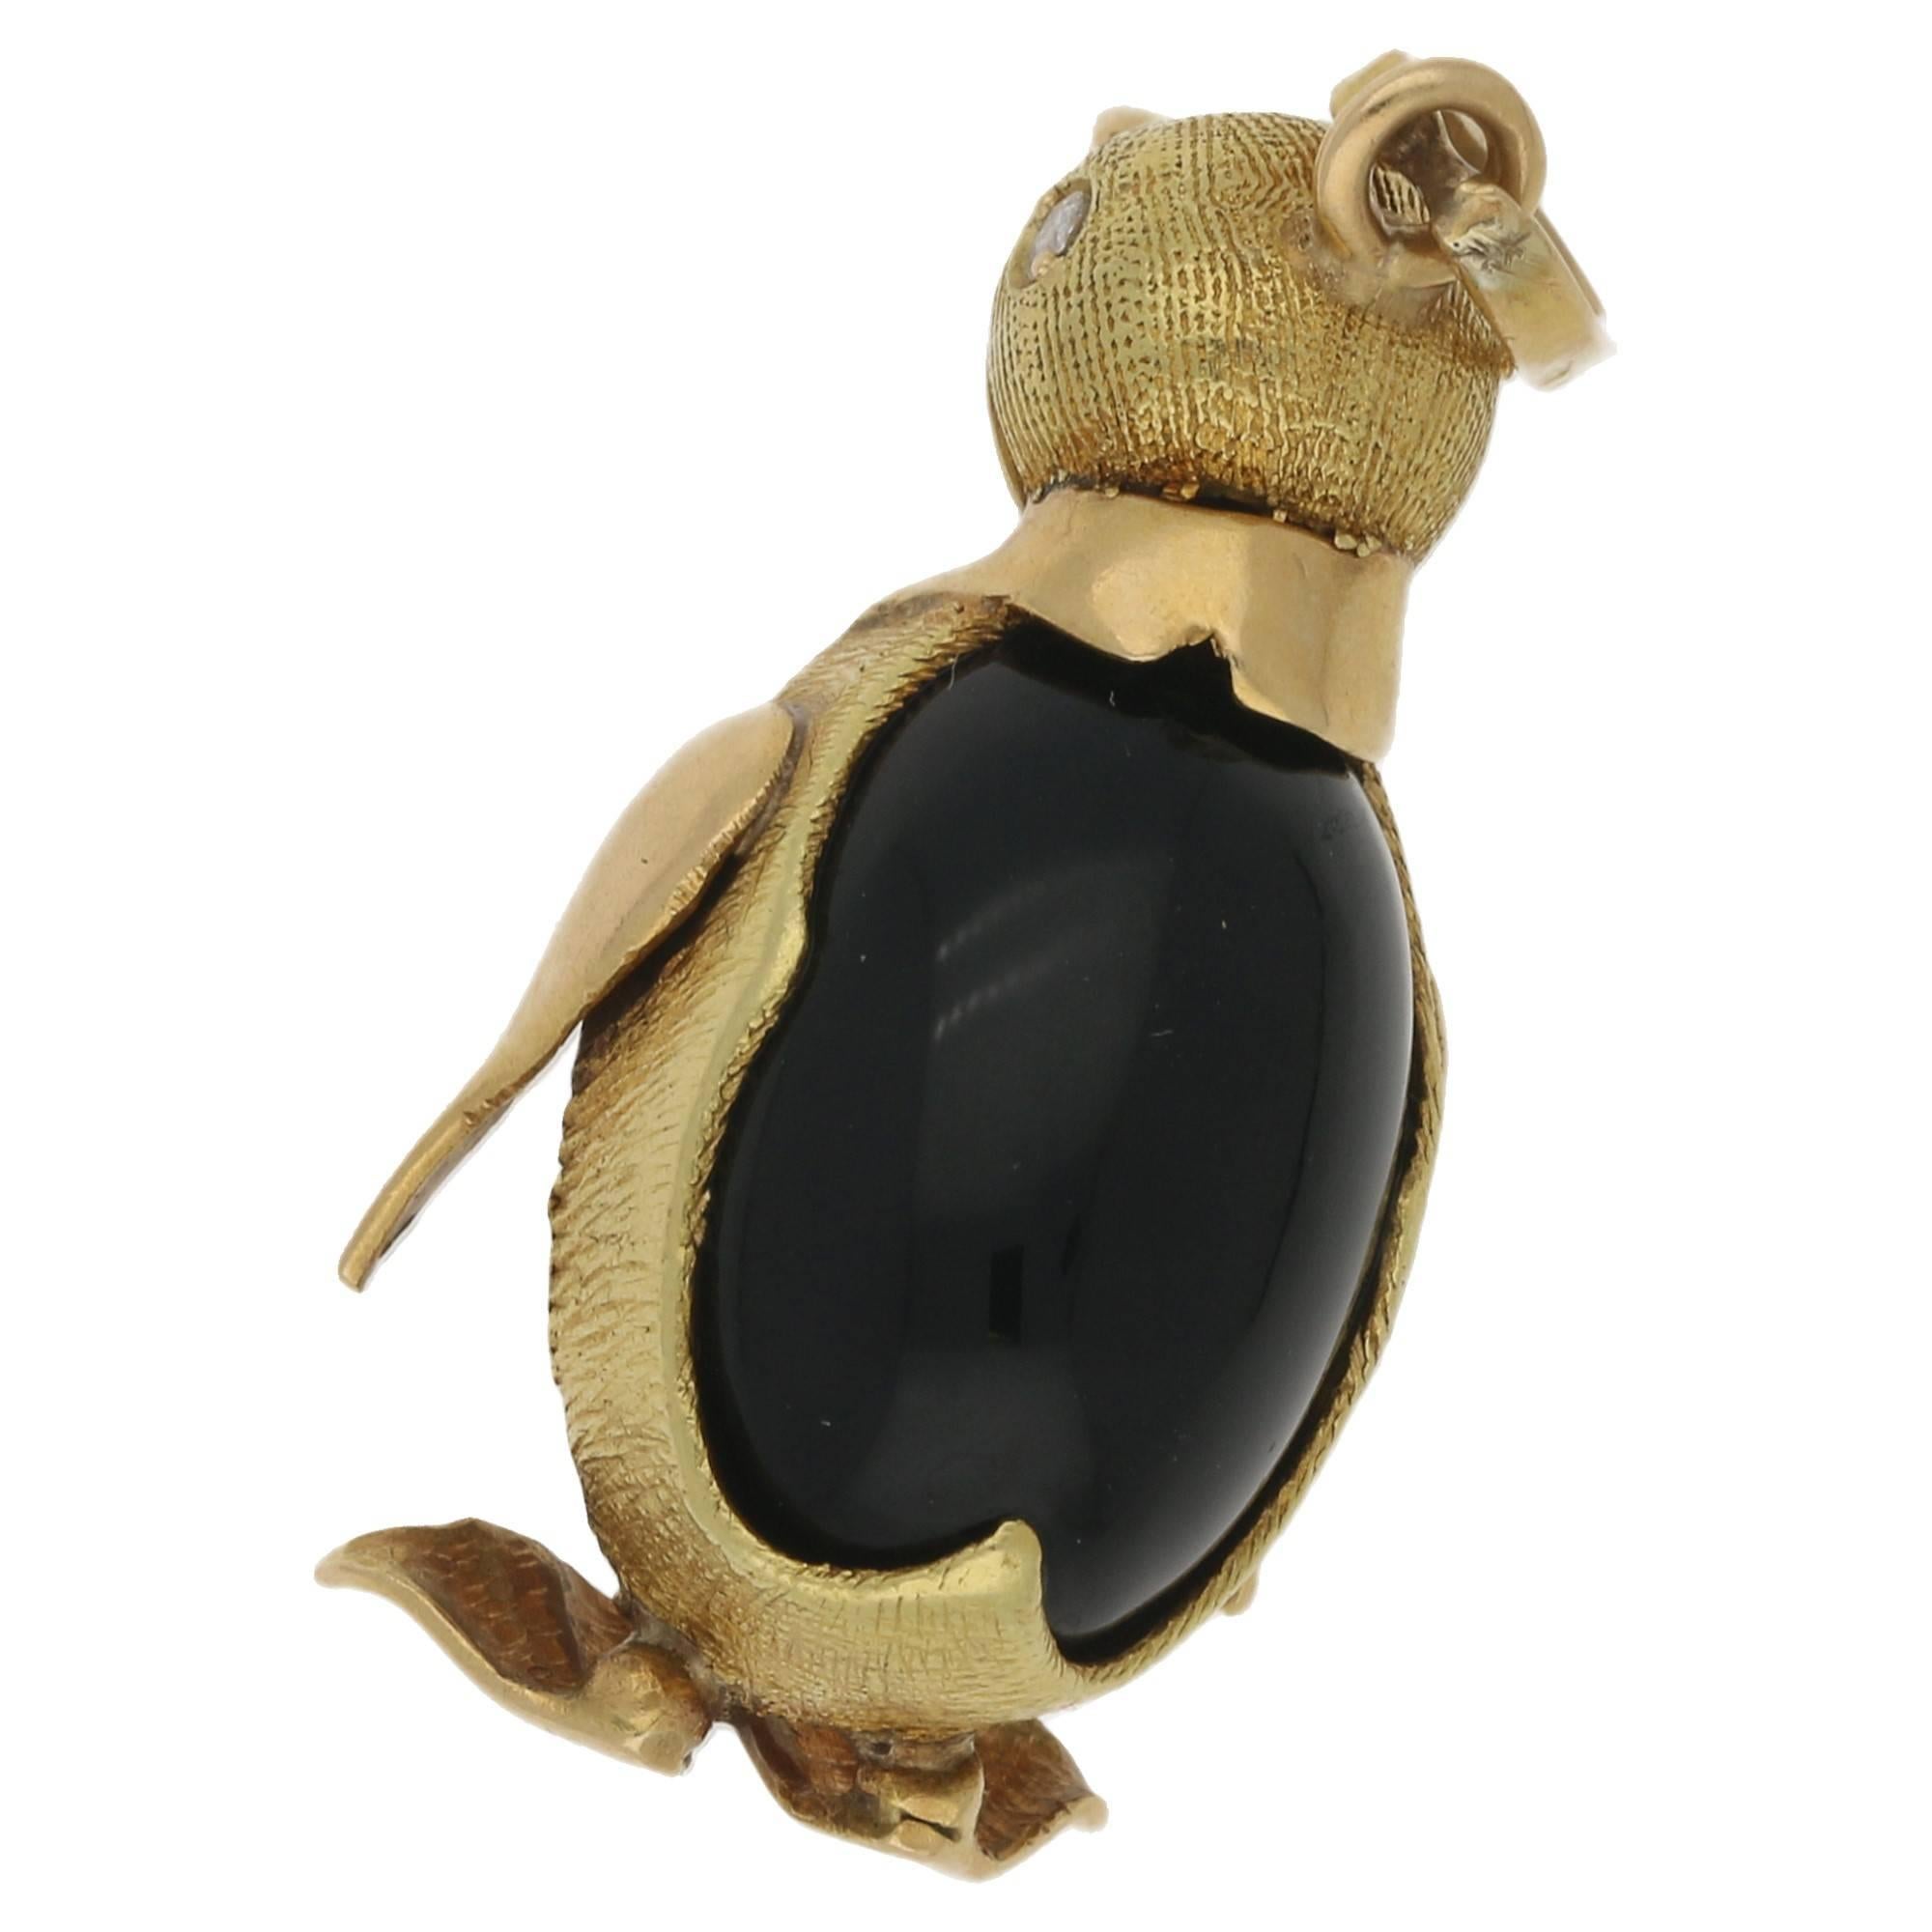 A very cute rotund penguin charm, with a cabochon gem set body. Detailed with diamond eyes, in rich 18k yellow gold. The penguin measures 35mm to the top of the bale, width 18mm. The gold is beautifully detailed, with a brushed effect. This would